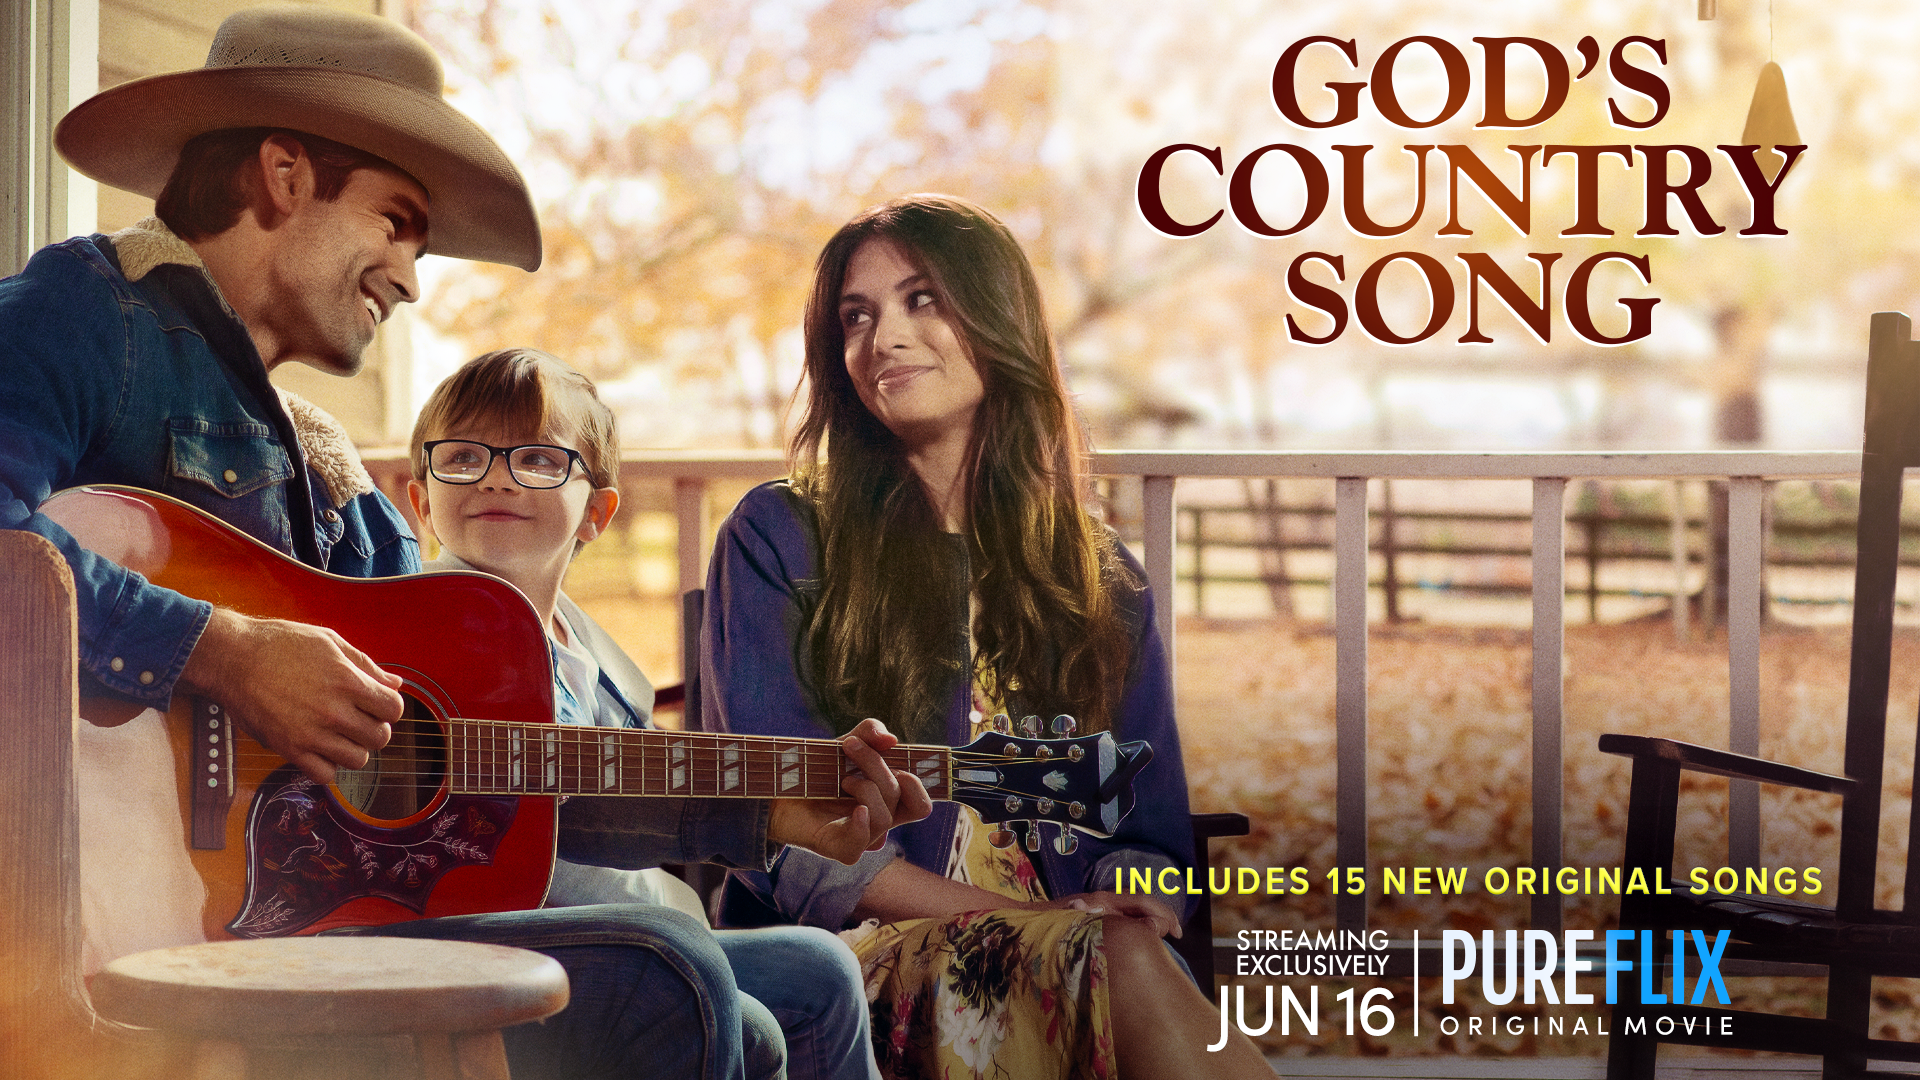 god's country song pure flix original movie